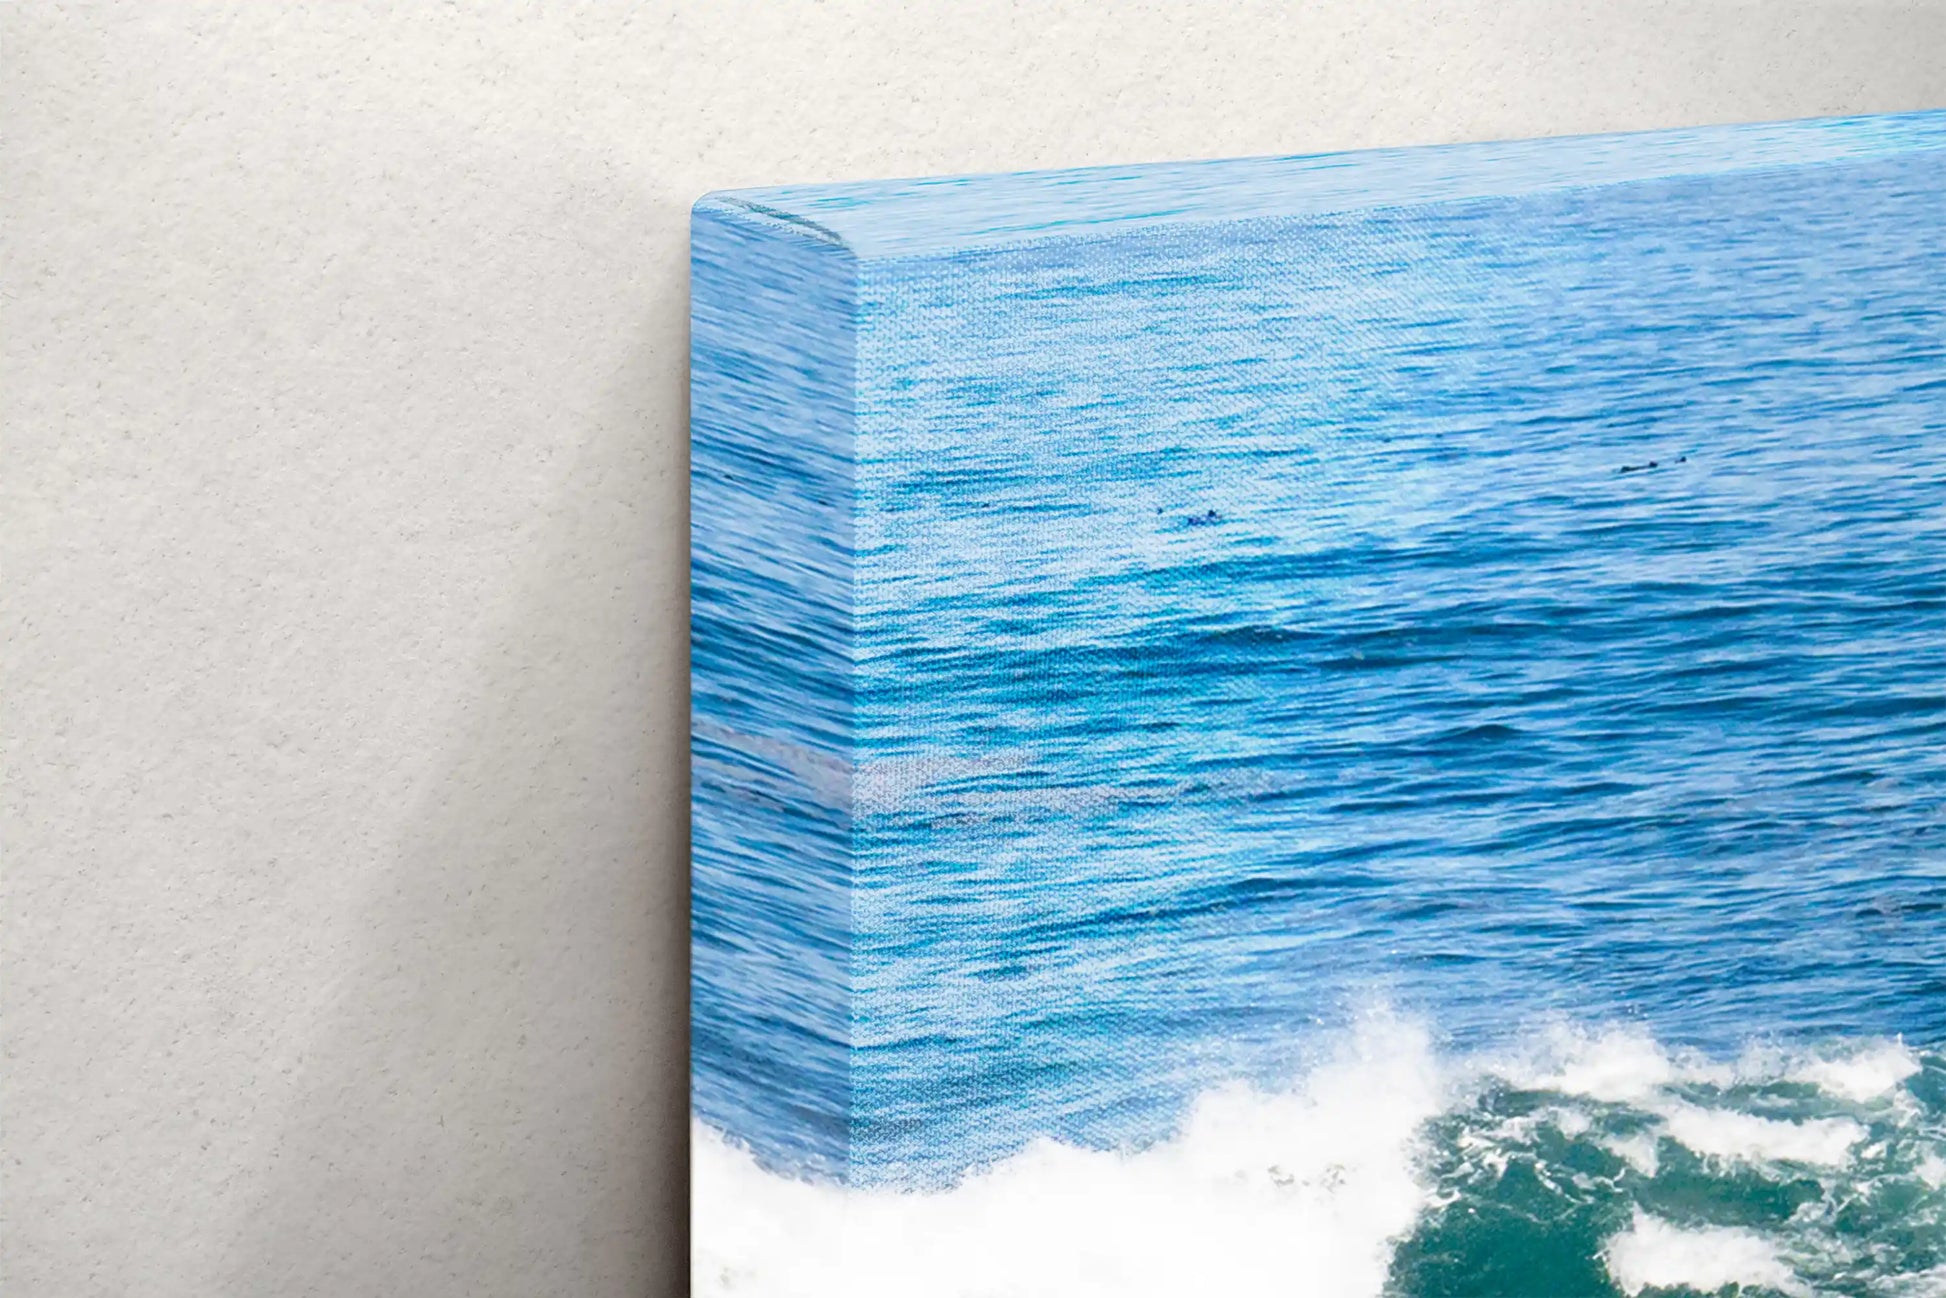 Detail shot of the back of the ocean scene canvas, showing the solid frame and mounting hardware.